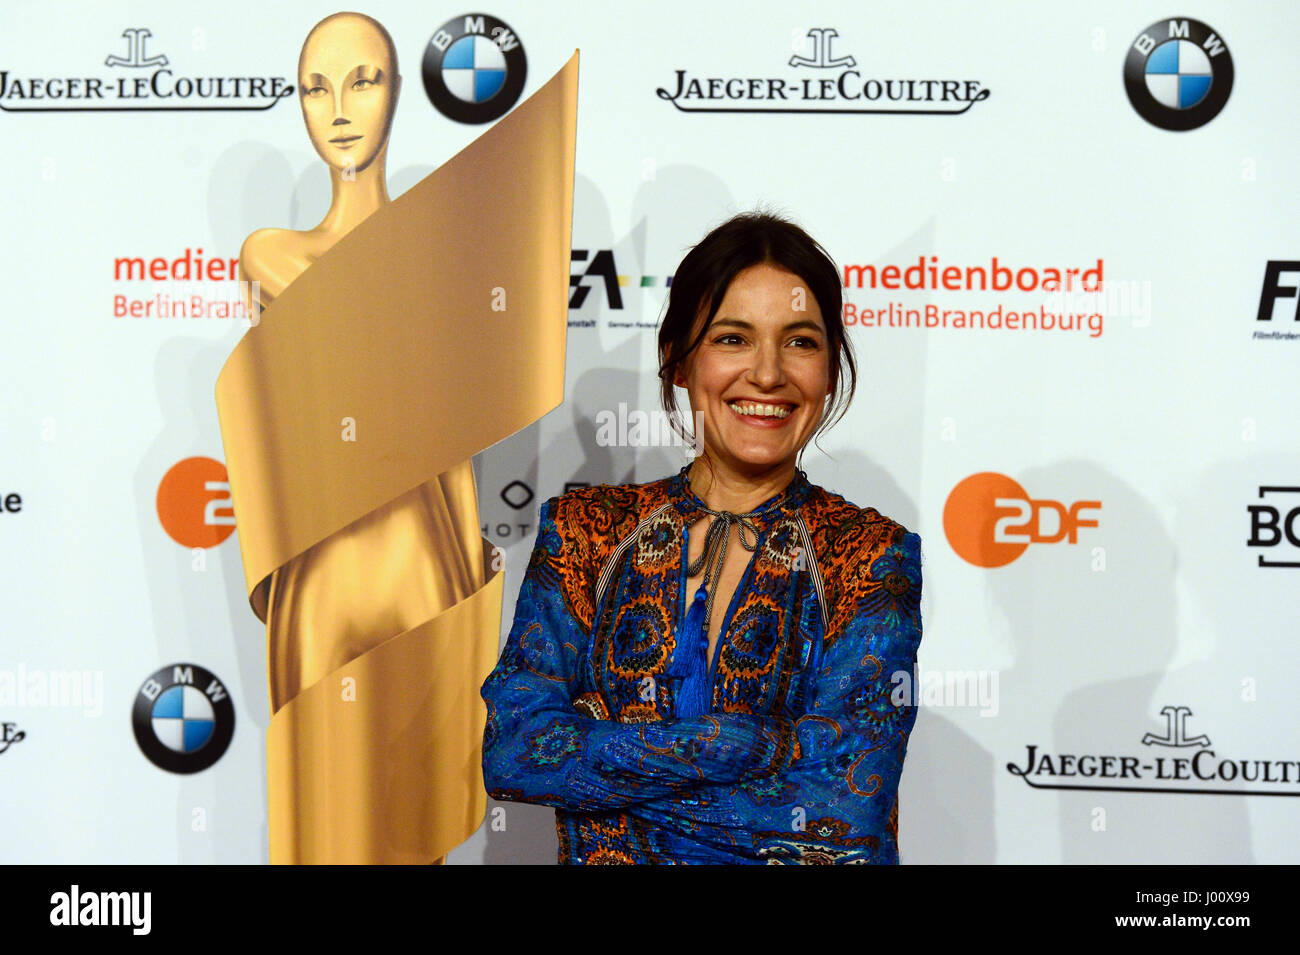 Berlin, Germany. 8th Apr, 2017. Actress Nicolette Krebitz arrives at the reception for the nominees of the German Film Award ('Deutscher Filmpreis') in Berlin, Germany, 8 April 2017. Photo: Maurizio Gambarini/dpa/Alamy Live News Stock Photo